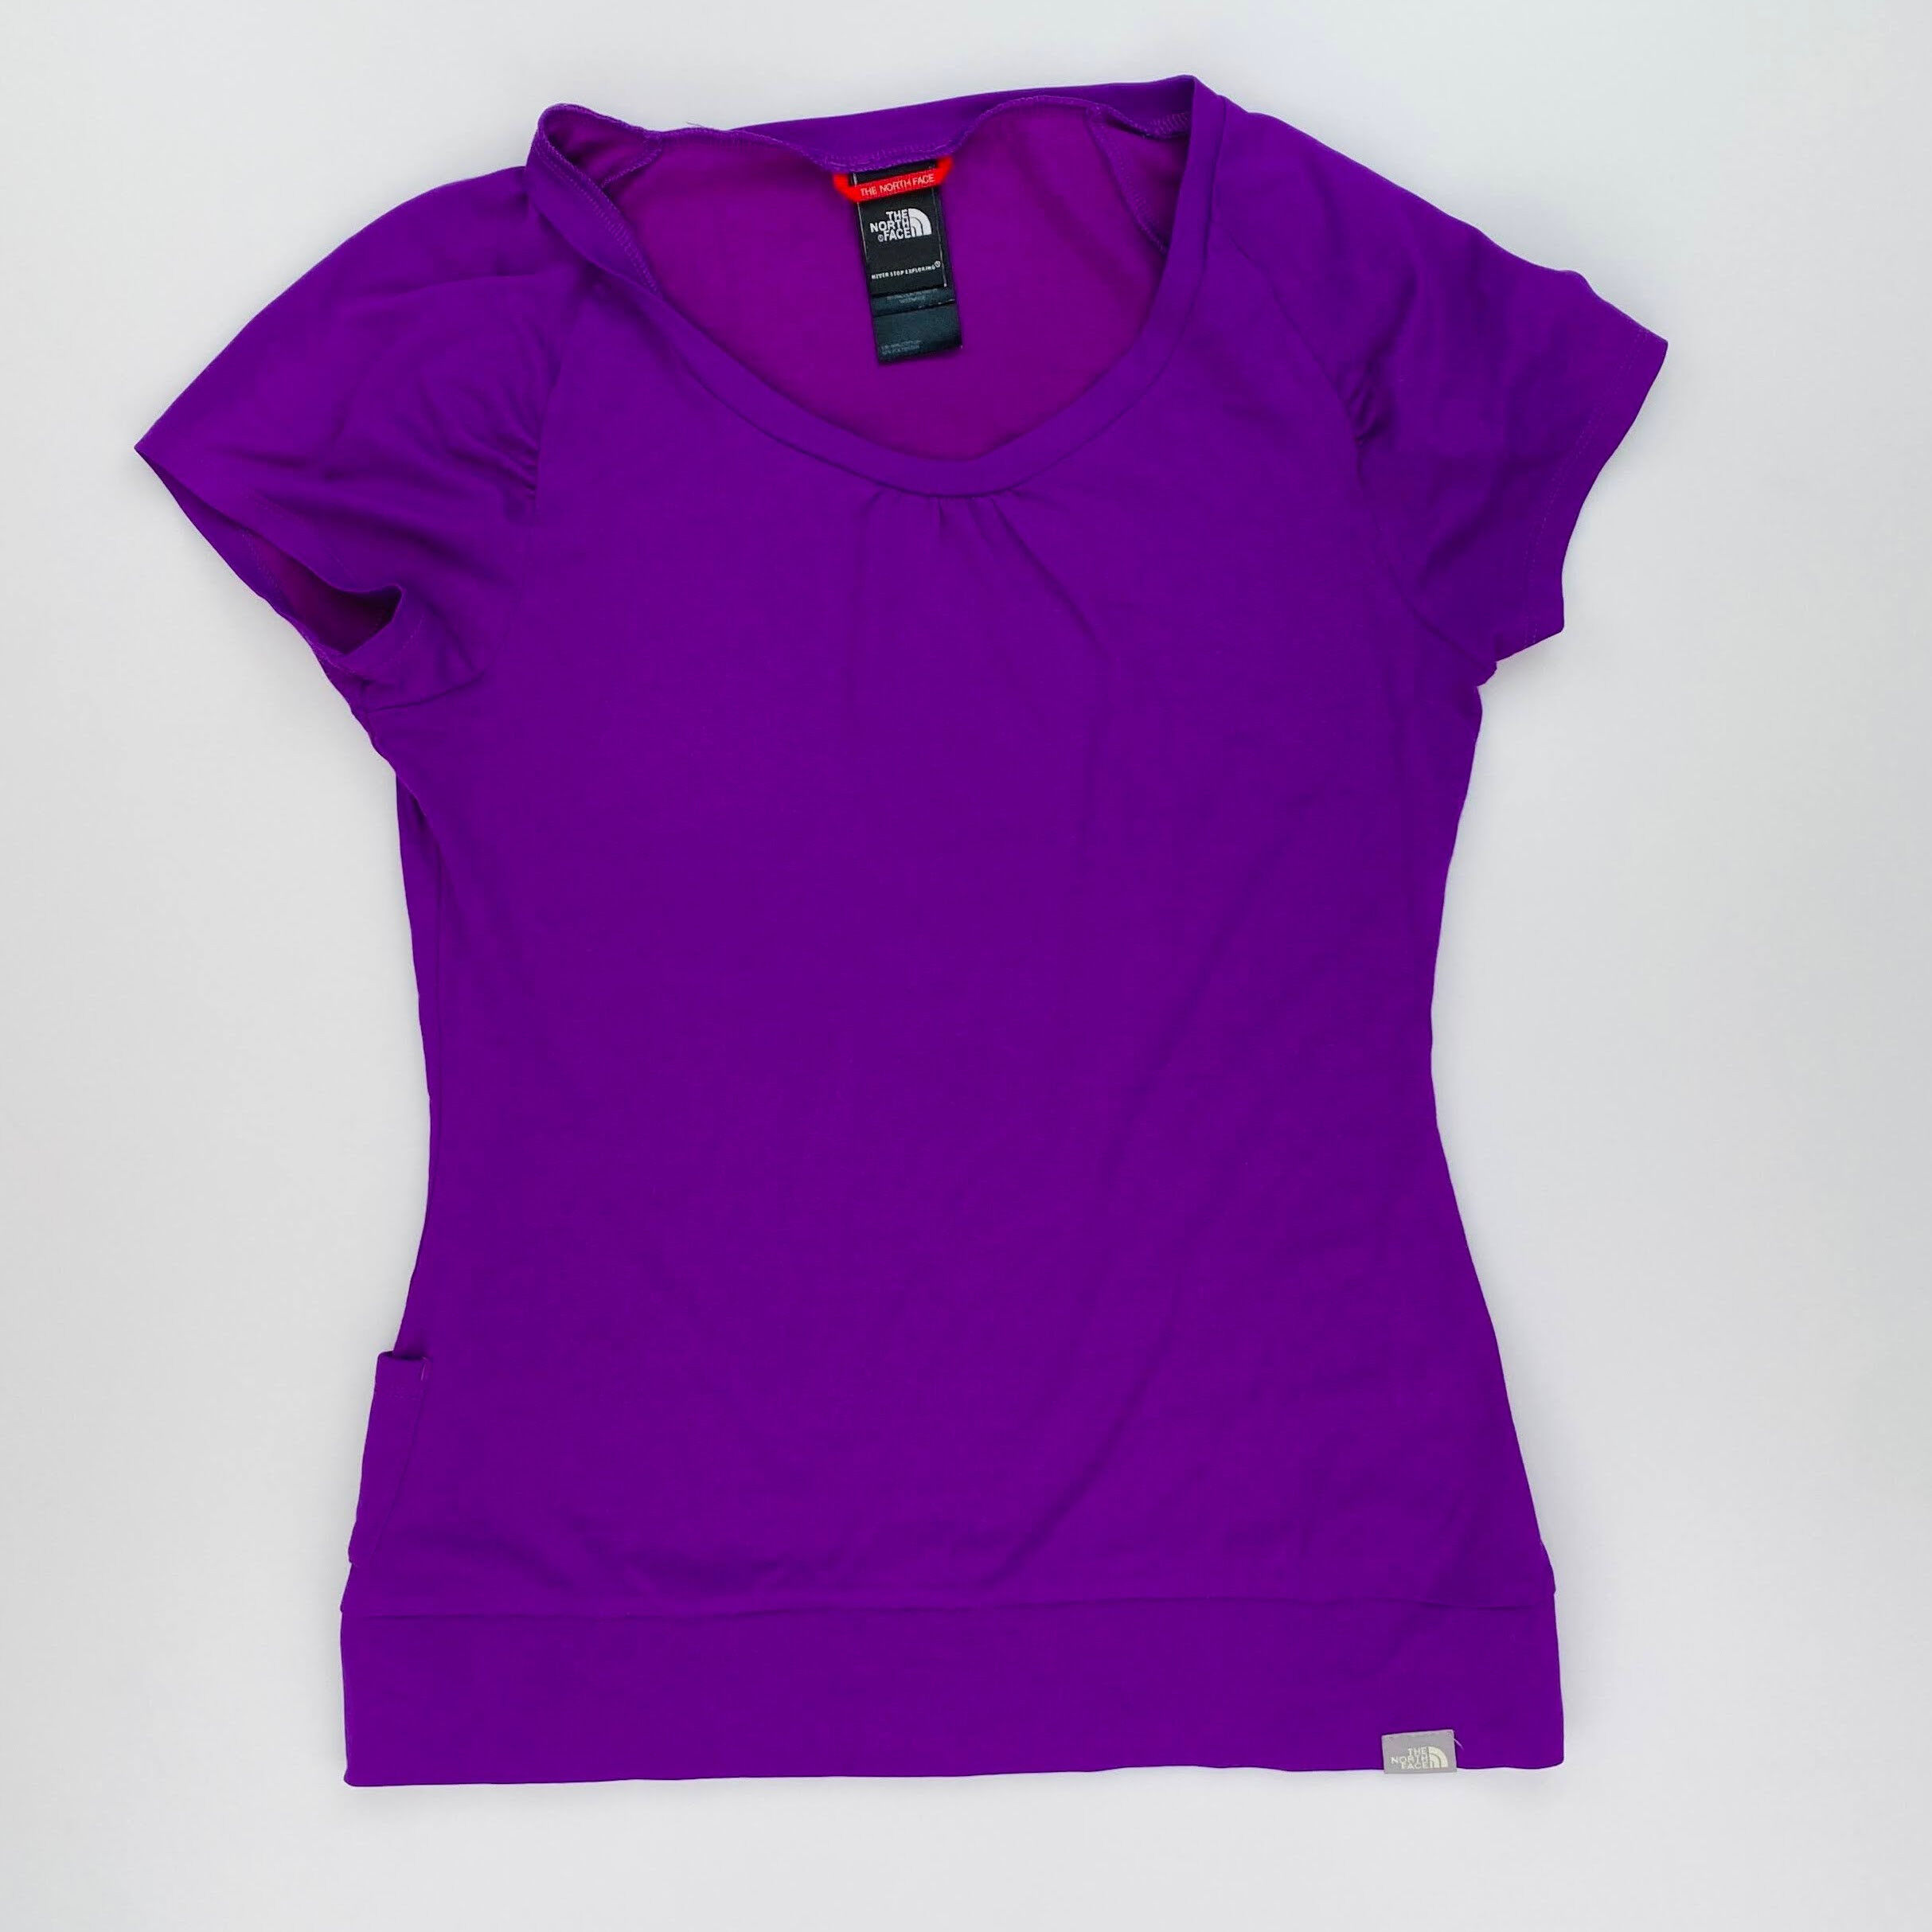 The North Face Tshirt Ambition - Tweedehands T-shirt - Dames - Purper - S | Hardloop